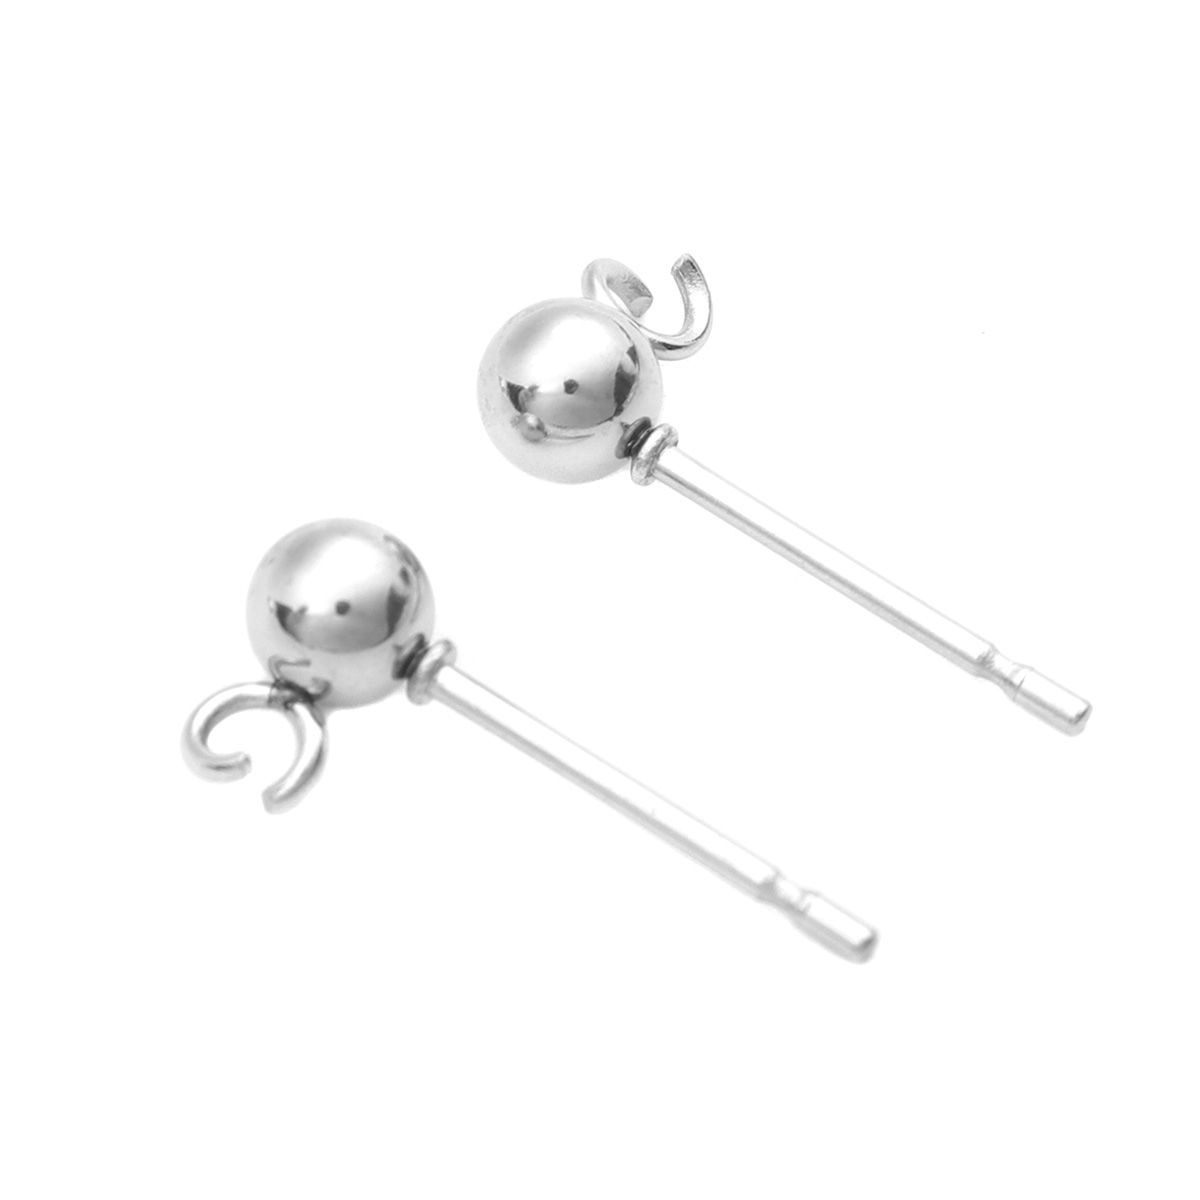 Picture of 304 Stainless Steel Ear Post Stud Earrings Ball Silver Tone W/ Loop 7mm x 4mm, Post/ Wire Size: (21 gauge), 100 PCs